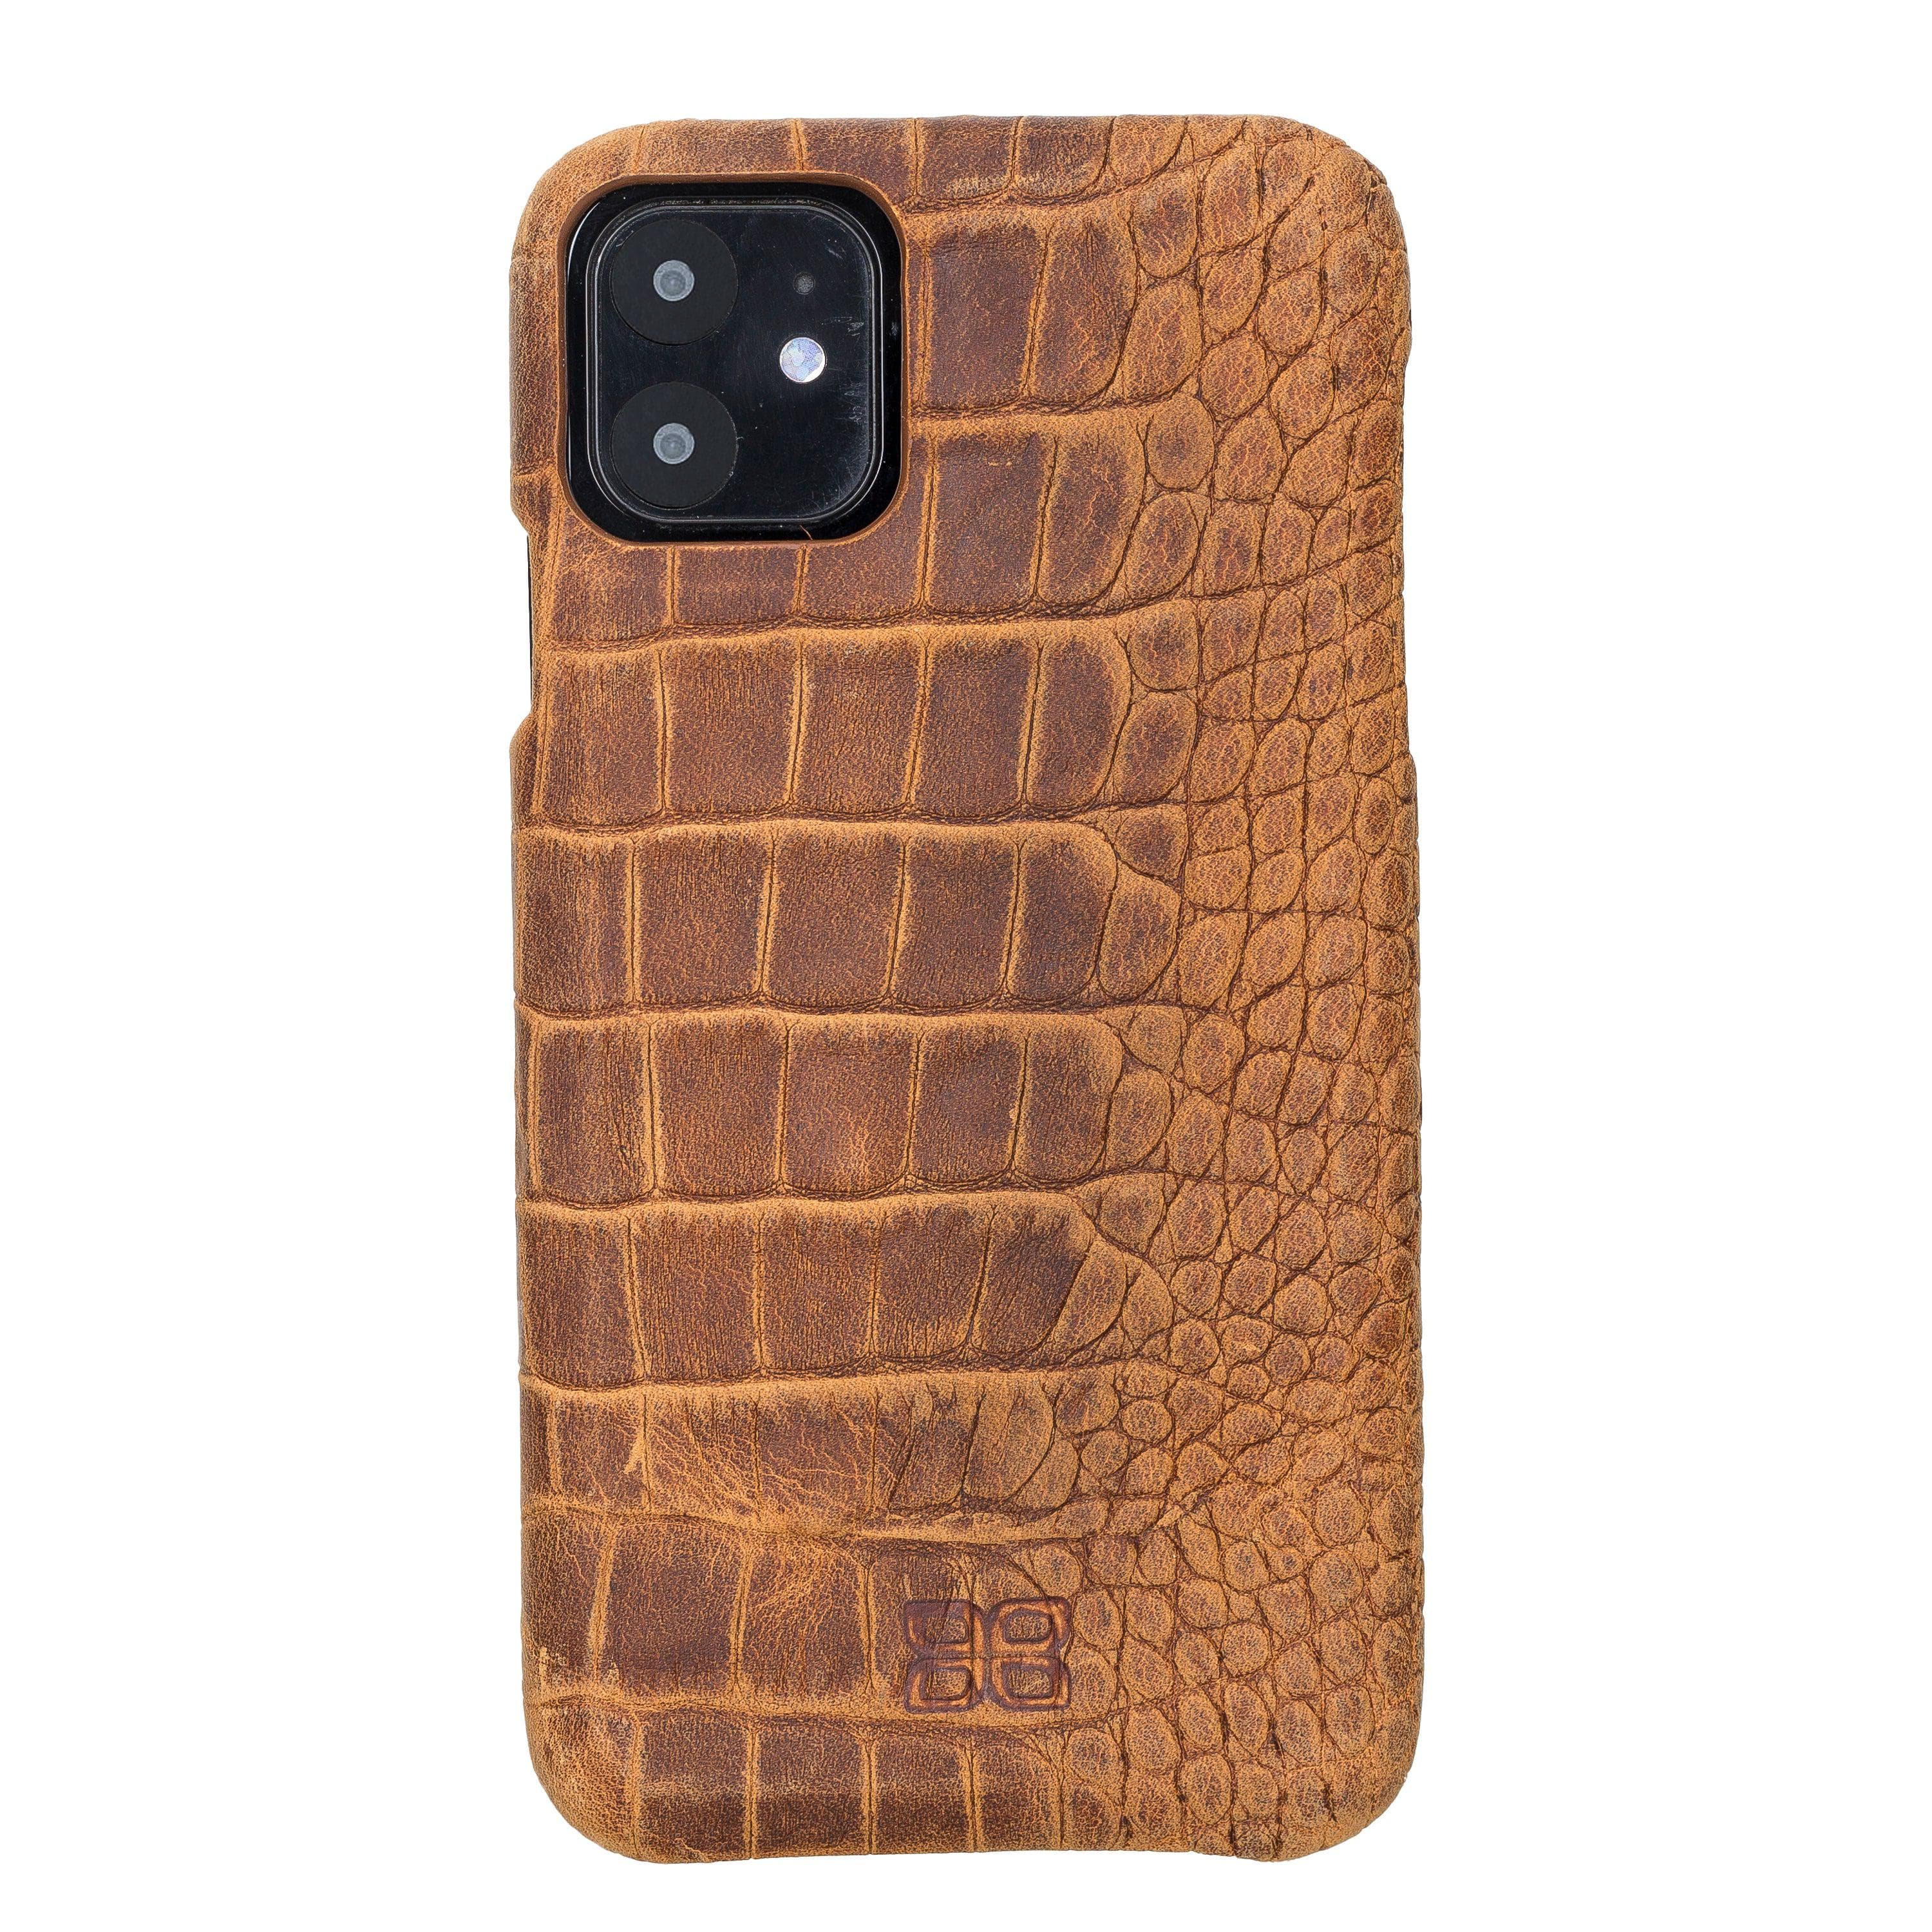 Bouletta Fully Leather Back Cover for Apple iPhone 11 Series İPhone 11 / Dragon Mustard Bouletta LTD